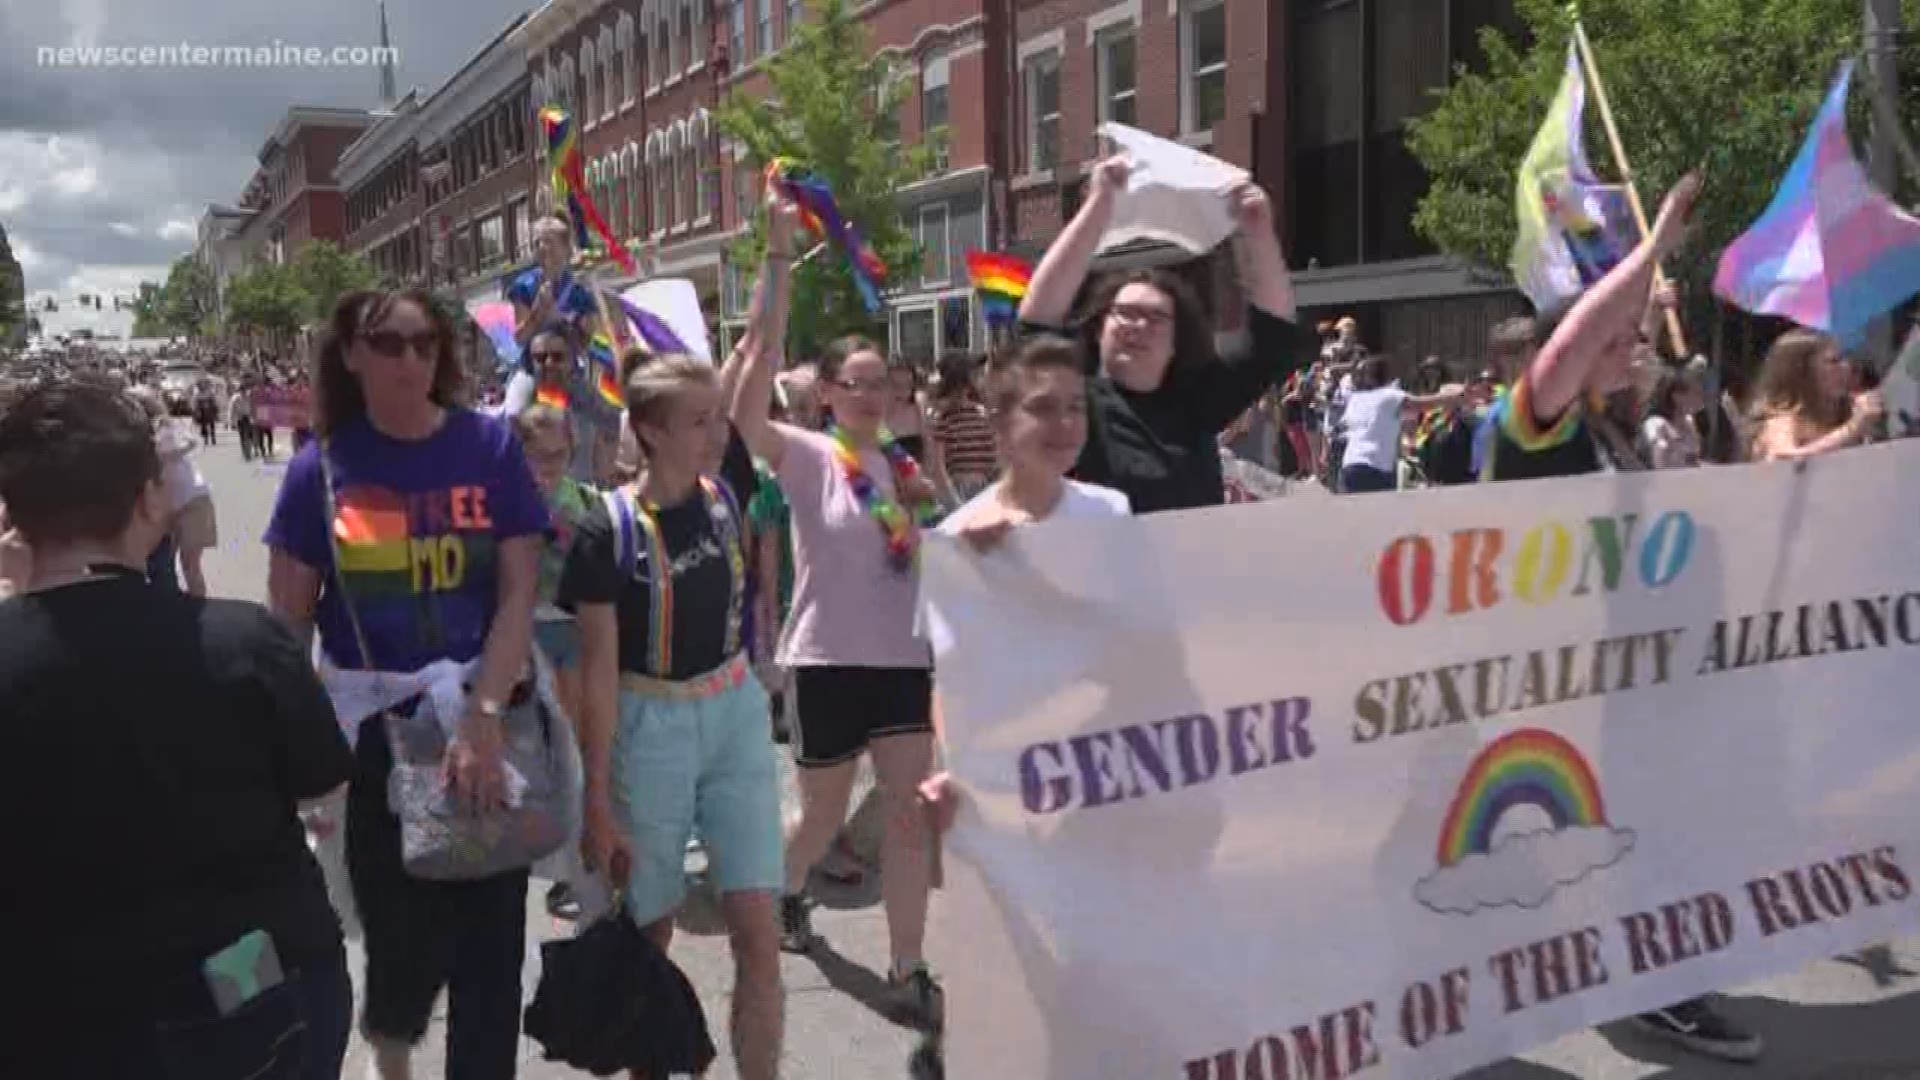 Hundreds were in attendance for the Bangor Pride parade and festival.